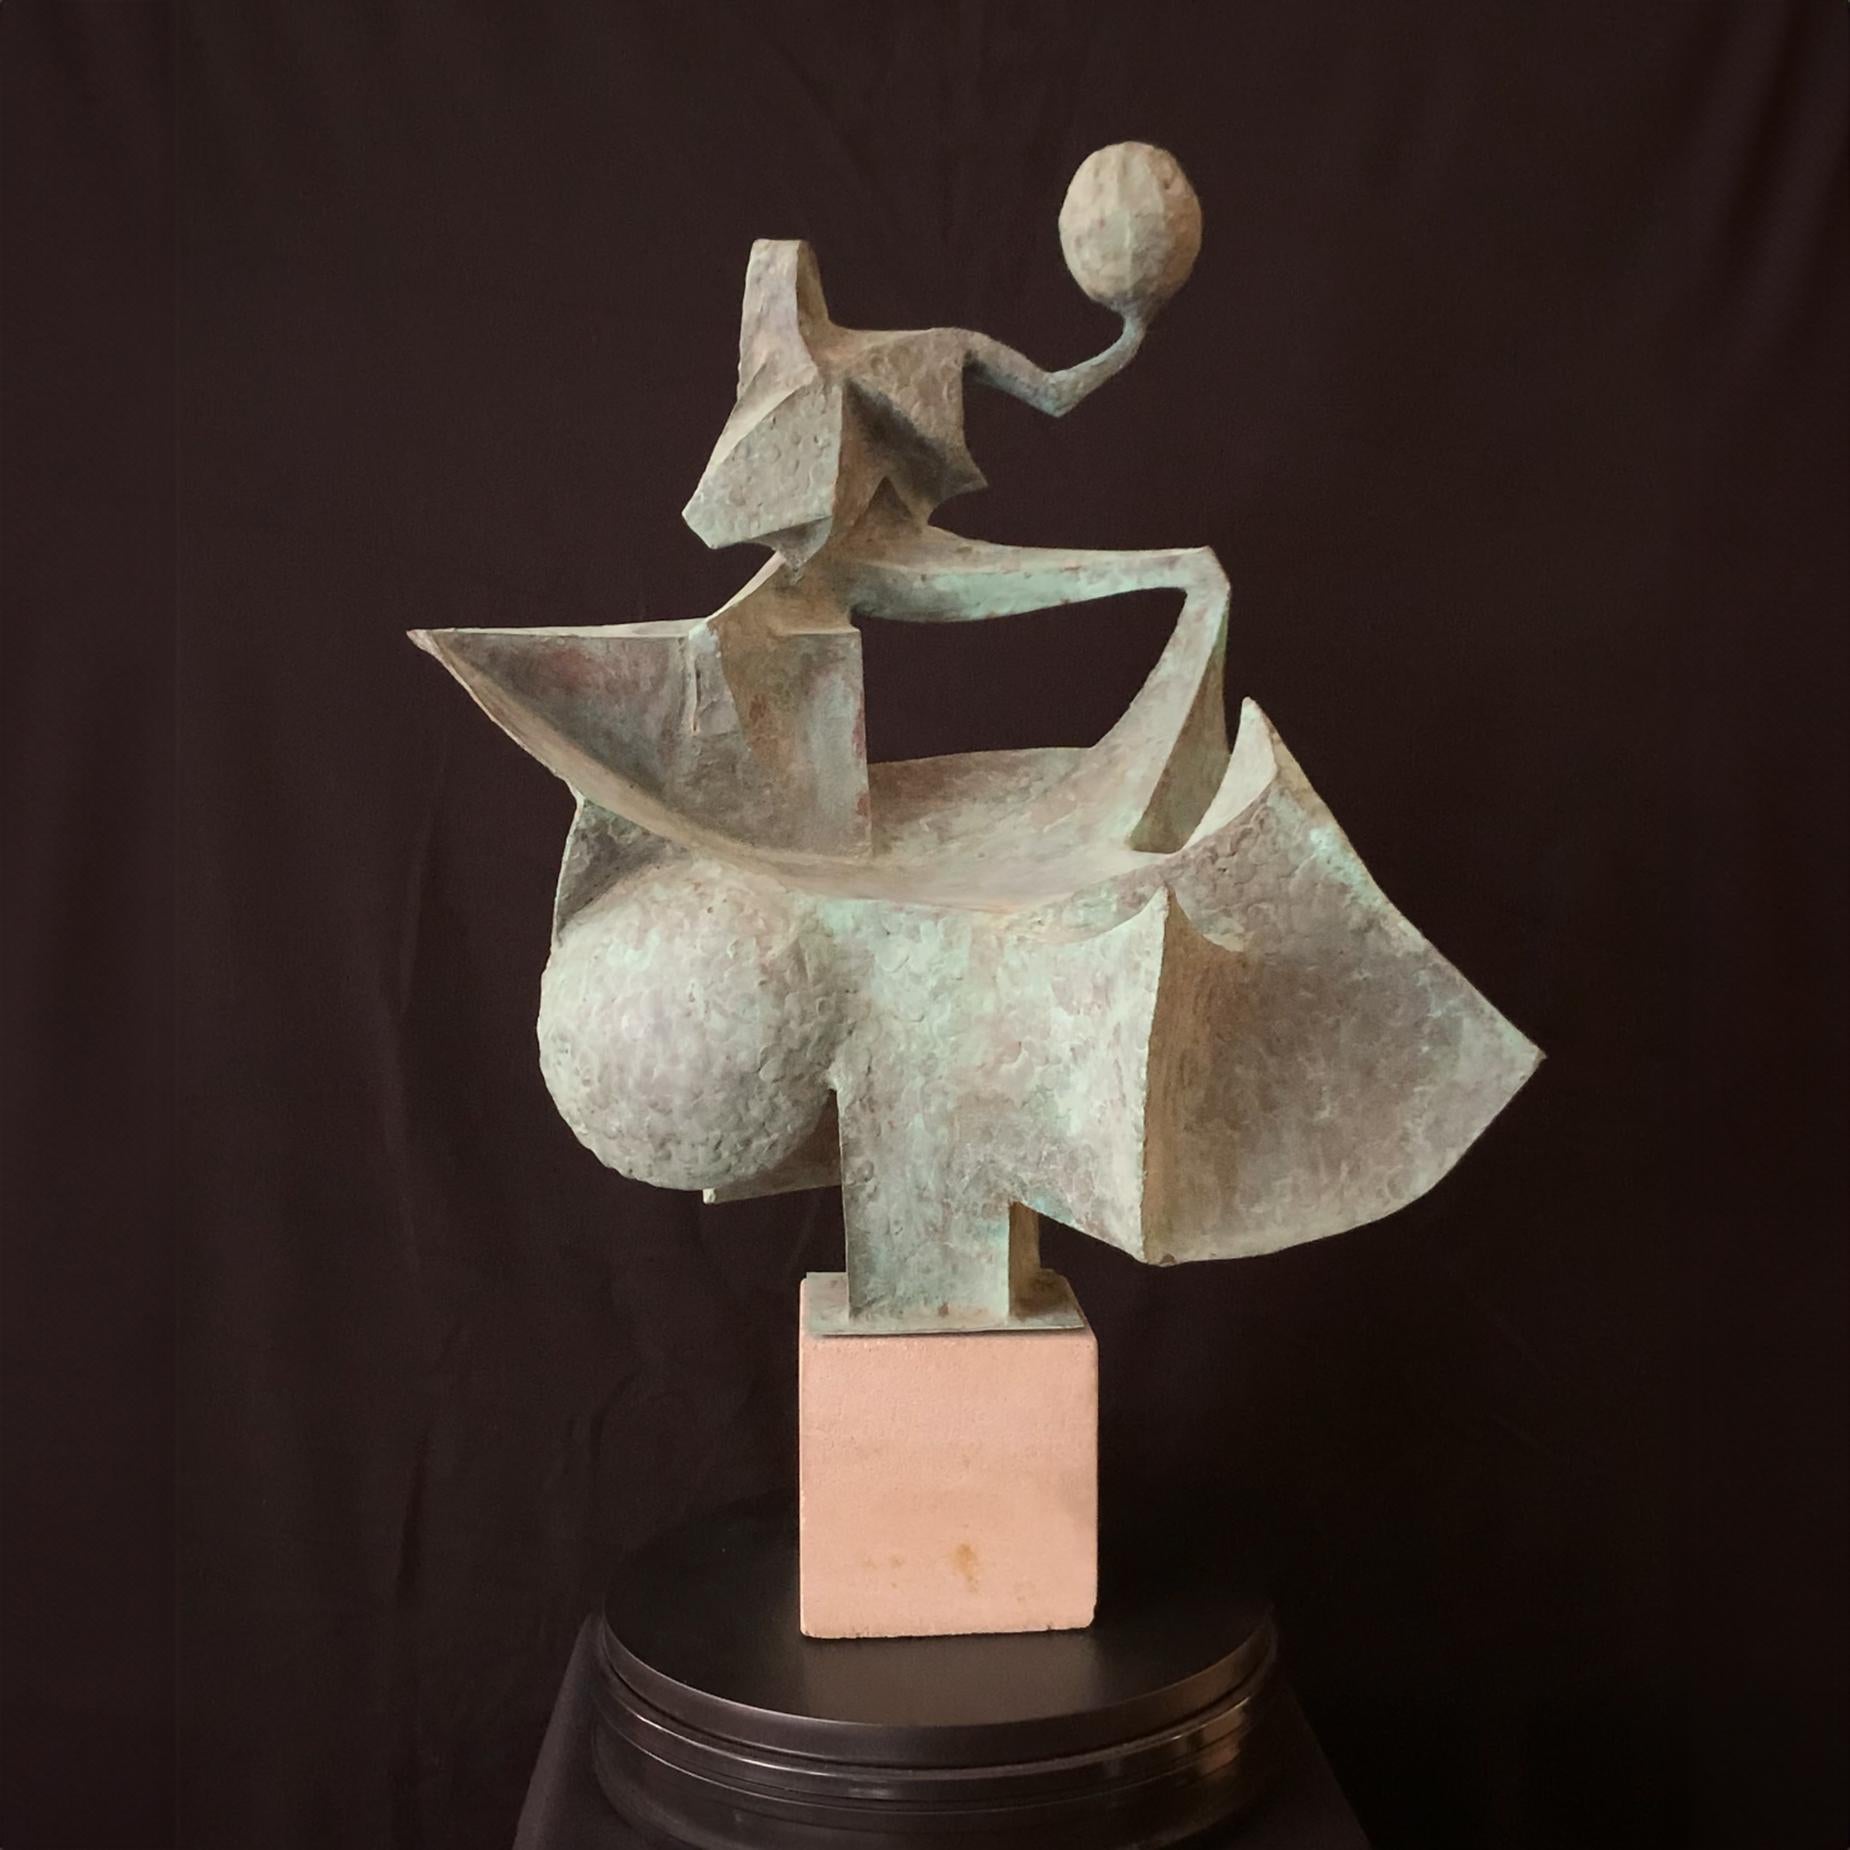 Signed on base, 'Clyde Ball' (American, 1929-2017) and created 1975. Mounted on the artist's original granite base. (height, including base, 22 inches)

Born in Indiana, Clyde Ball first attended Utah State University and the Art Institute of